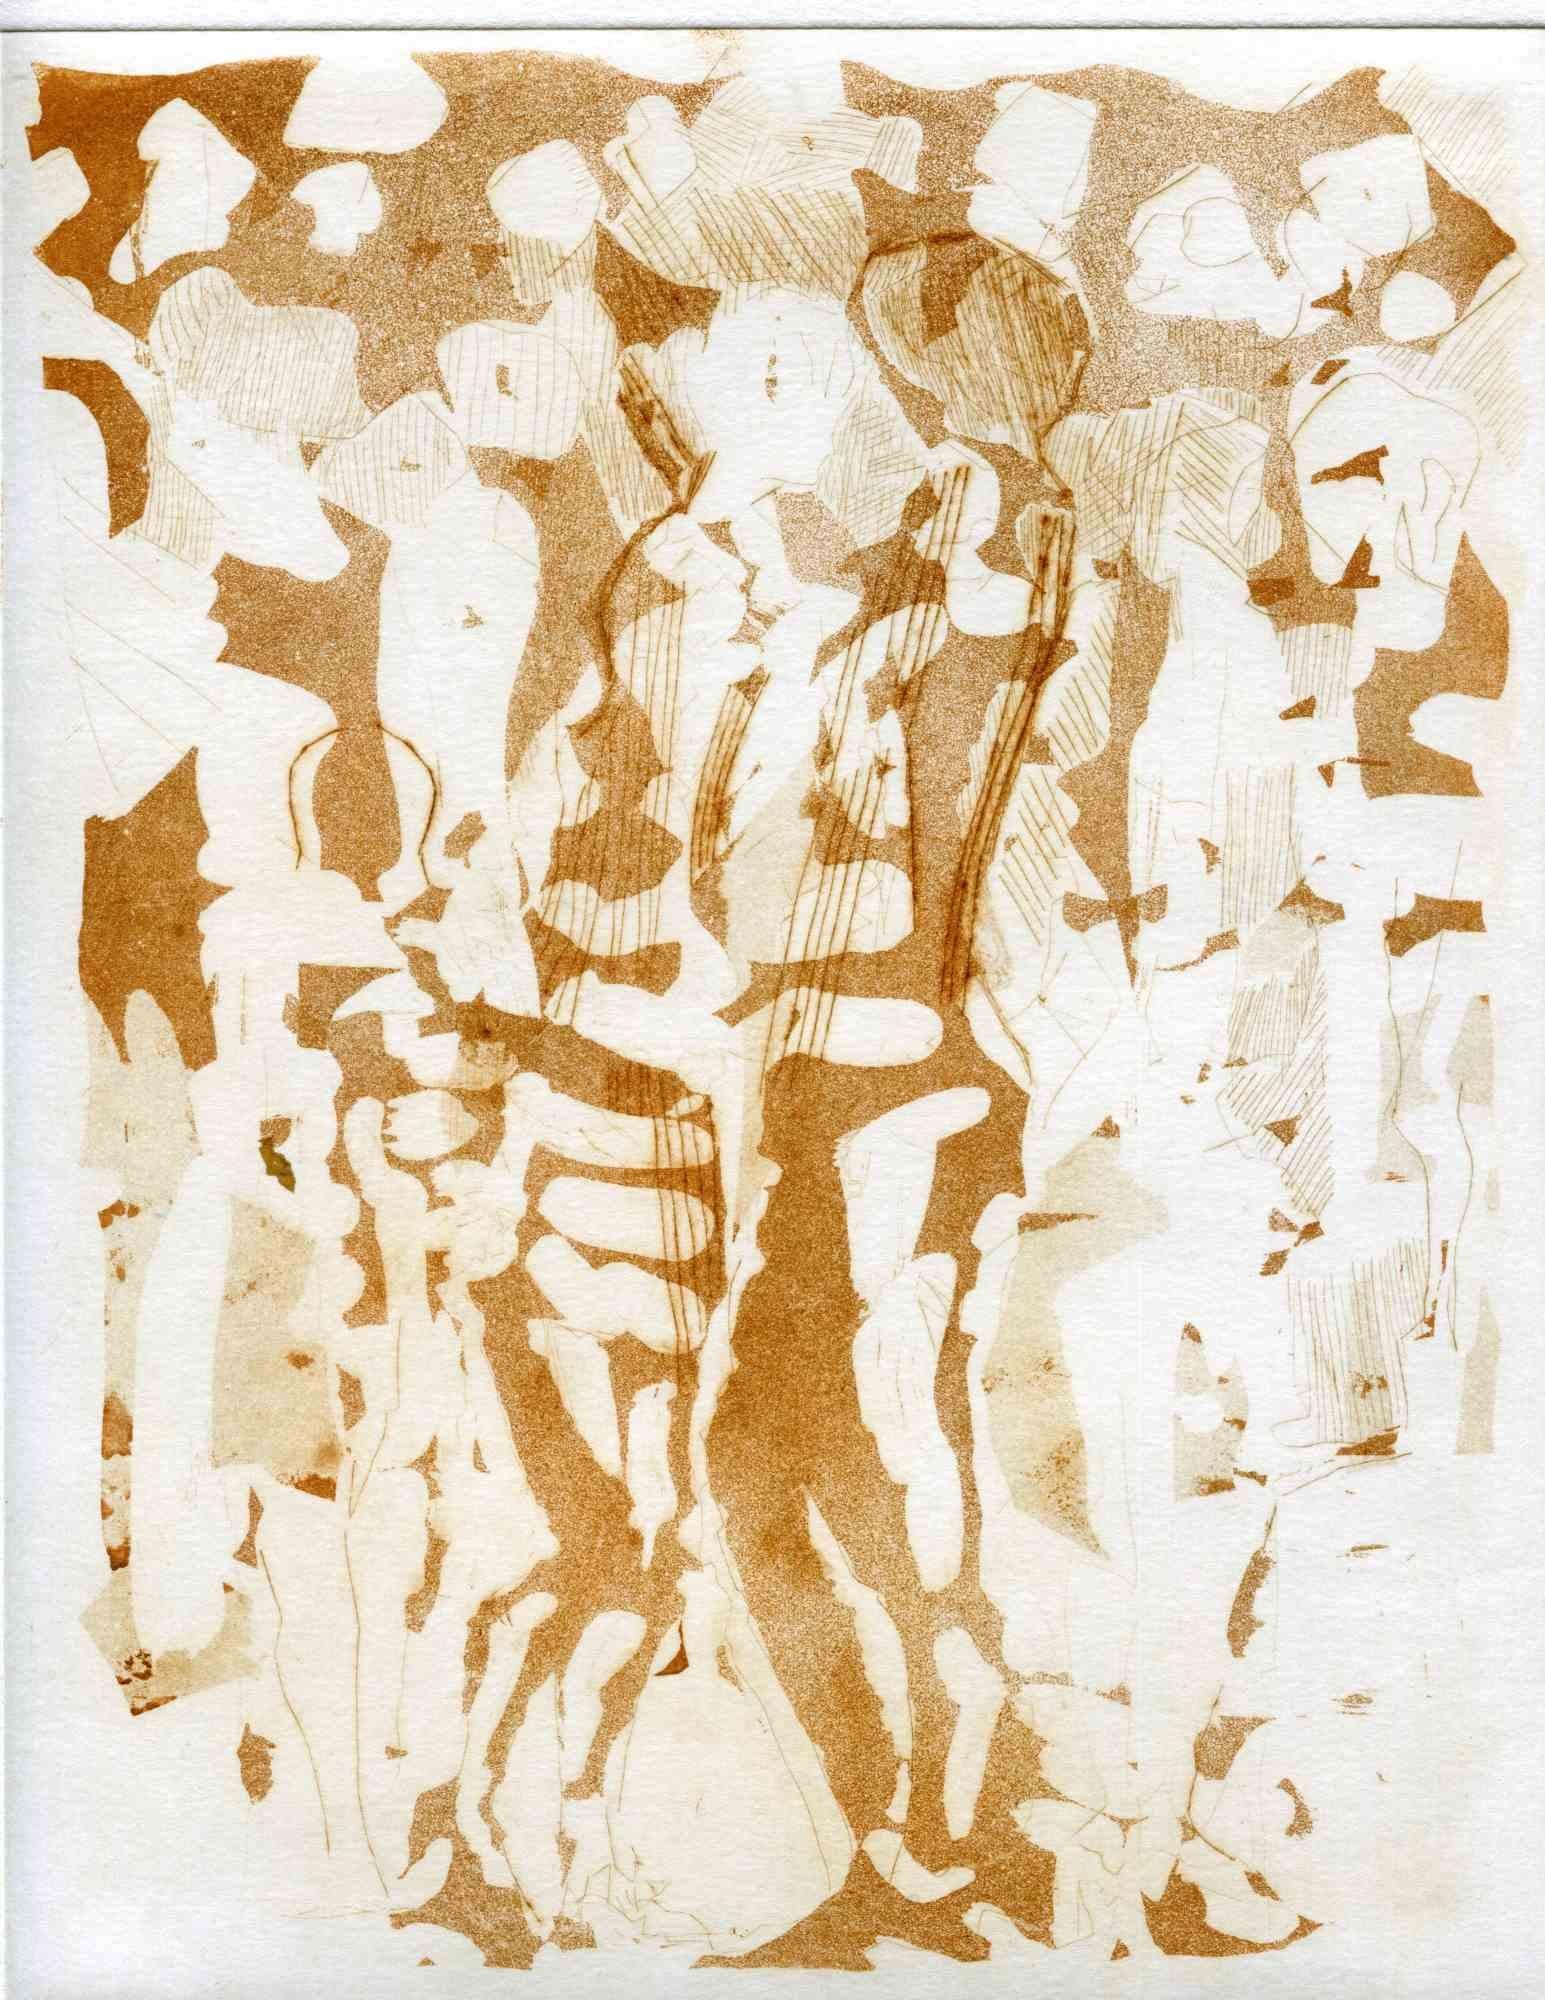 Unknown Abstract Print - Figures - Original Etching and Drypoint - Mid-20th Century